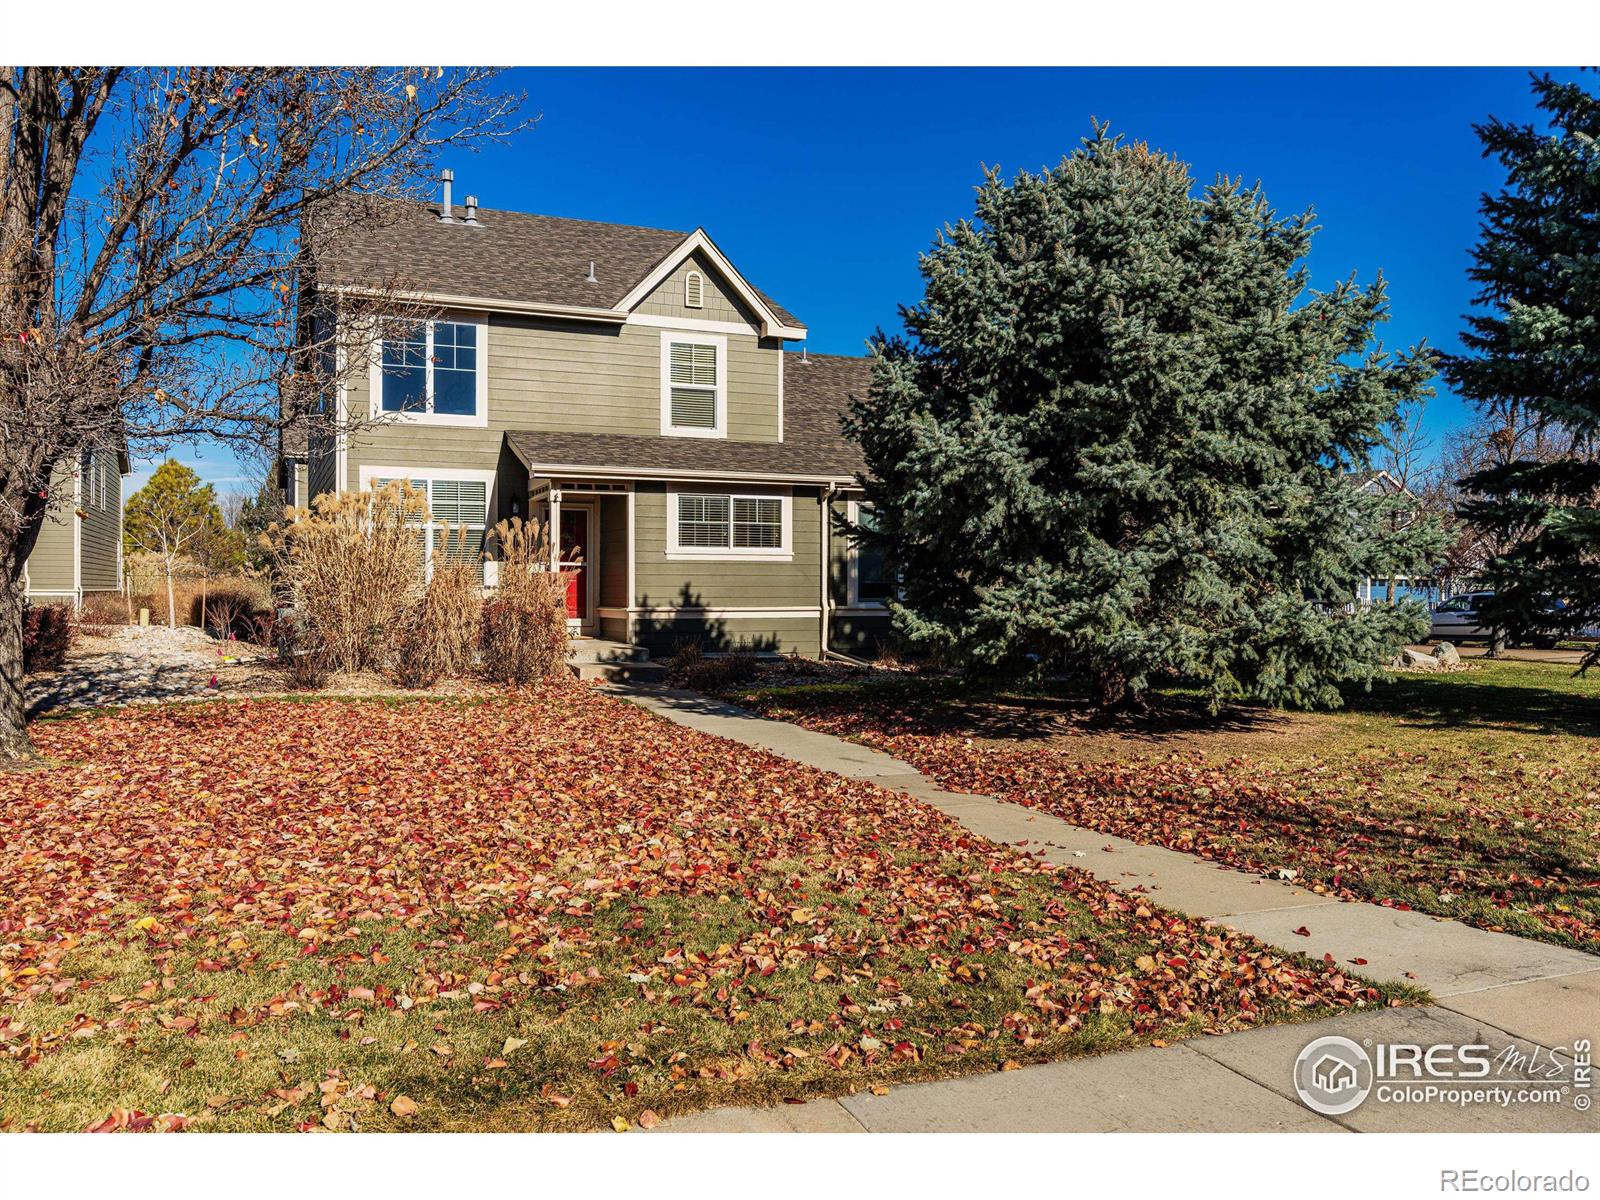 2756  County Fair Lane, fort collins MLS: 456789999932 Beds: 2 Baths: 3 Price: $442,500